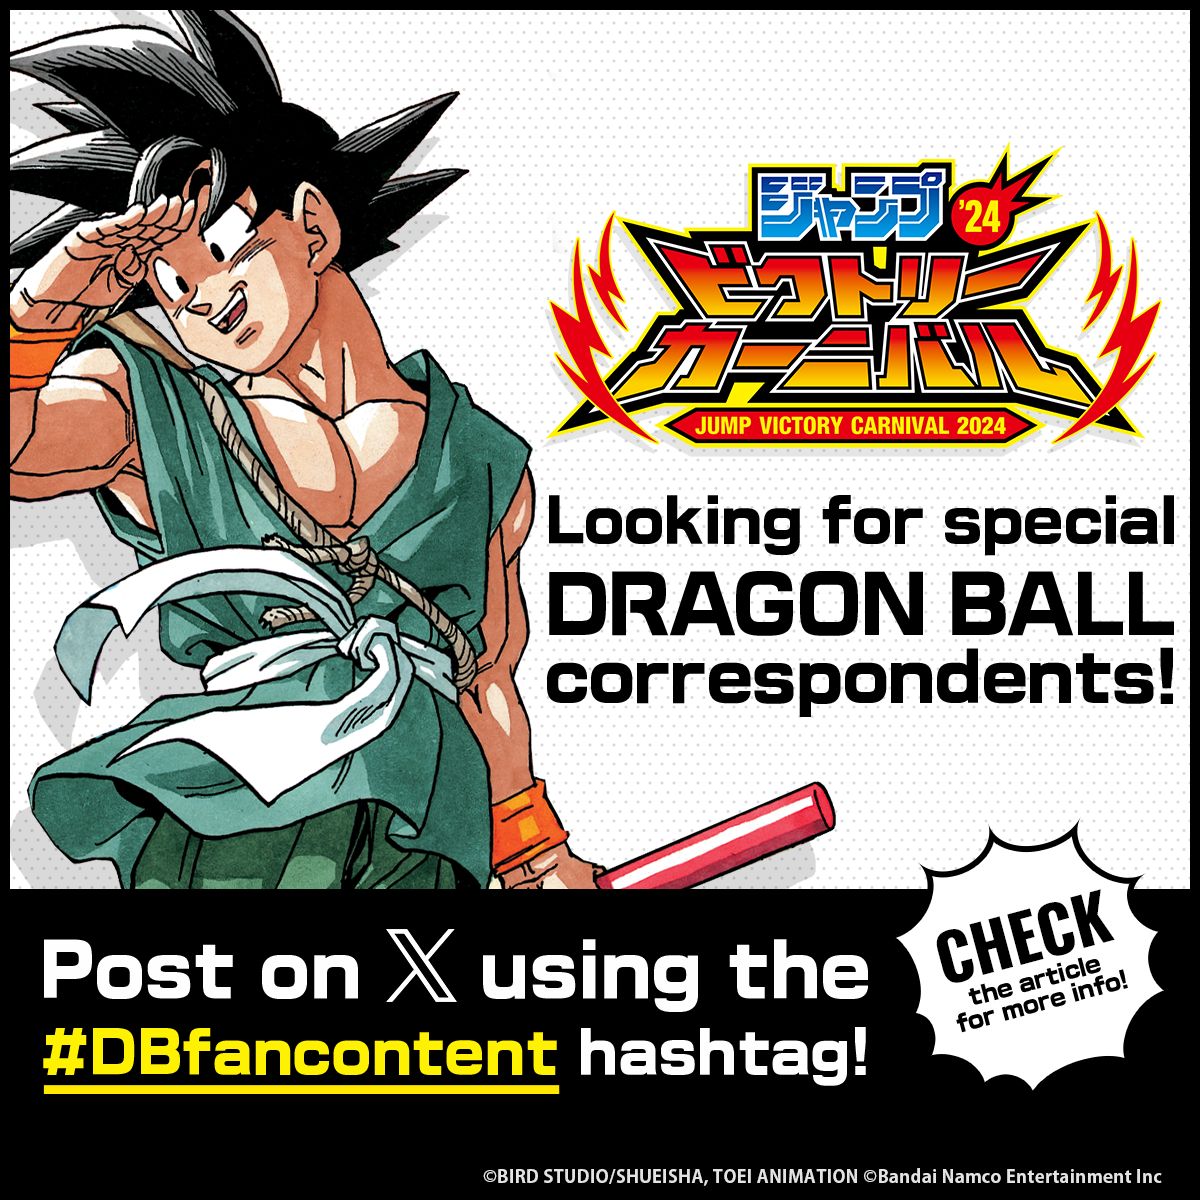 Looking for Special Correspondents for Jump Victory Carnival 2024! Just Post on X using the Hashtag #DBfancontent to Participate!